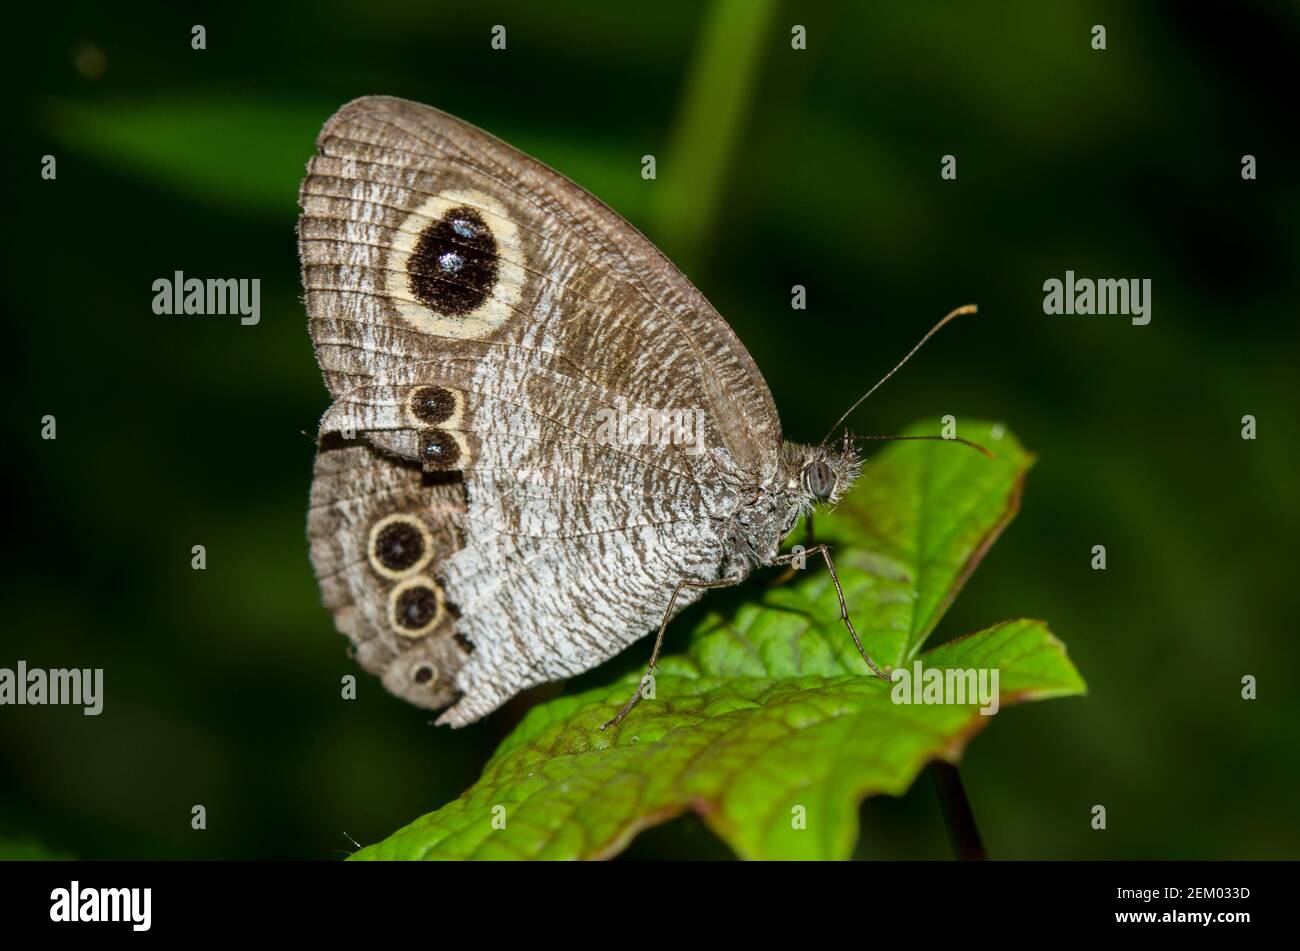 Common Five Ring Butterfly on leaf, Ypthima baldus, Klungkung, Bali, Indonesia Stock Photo